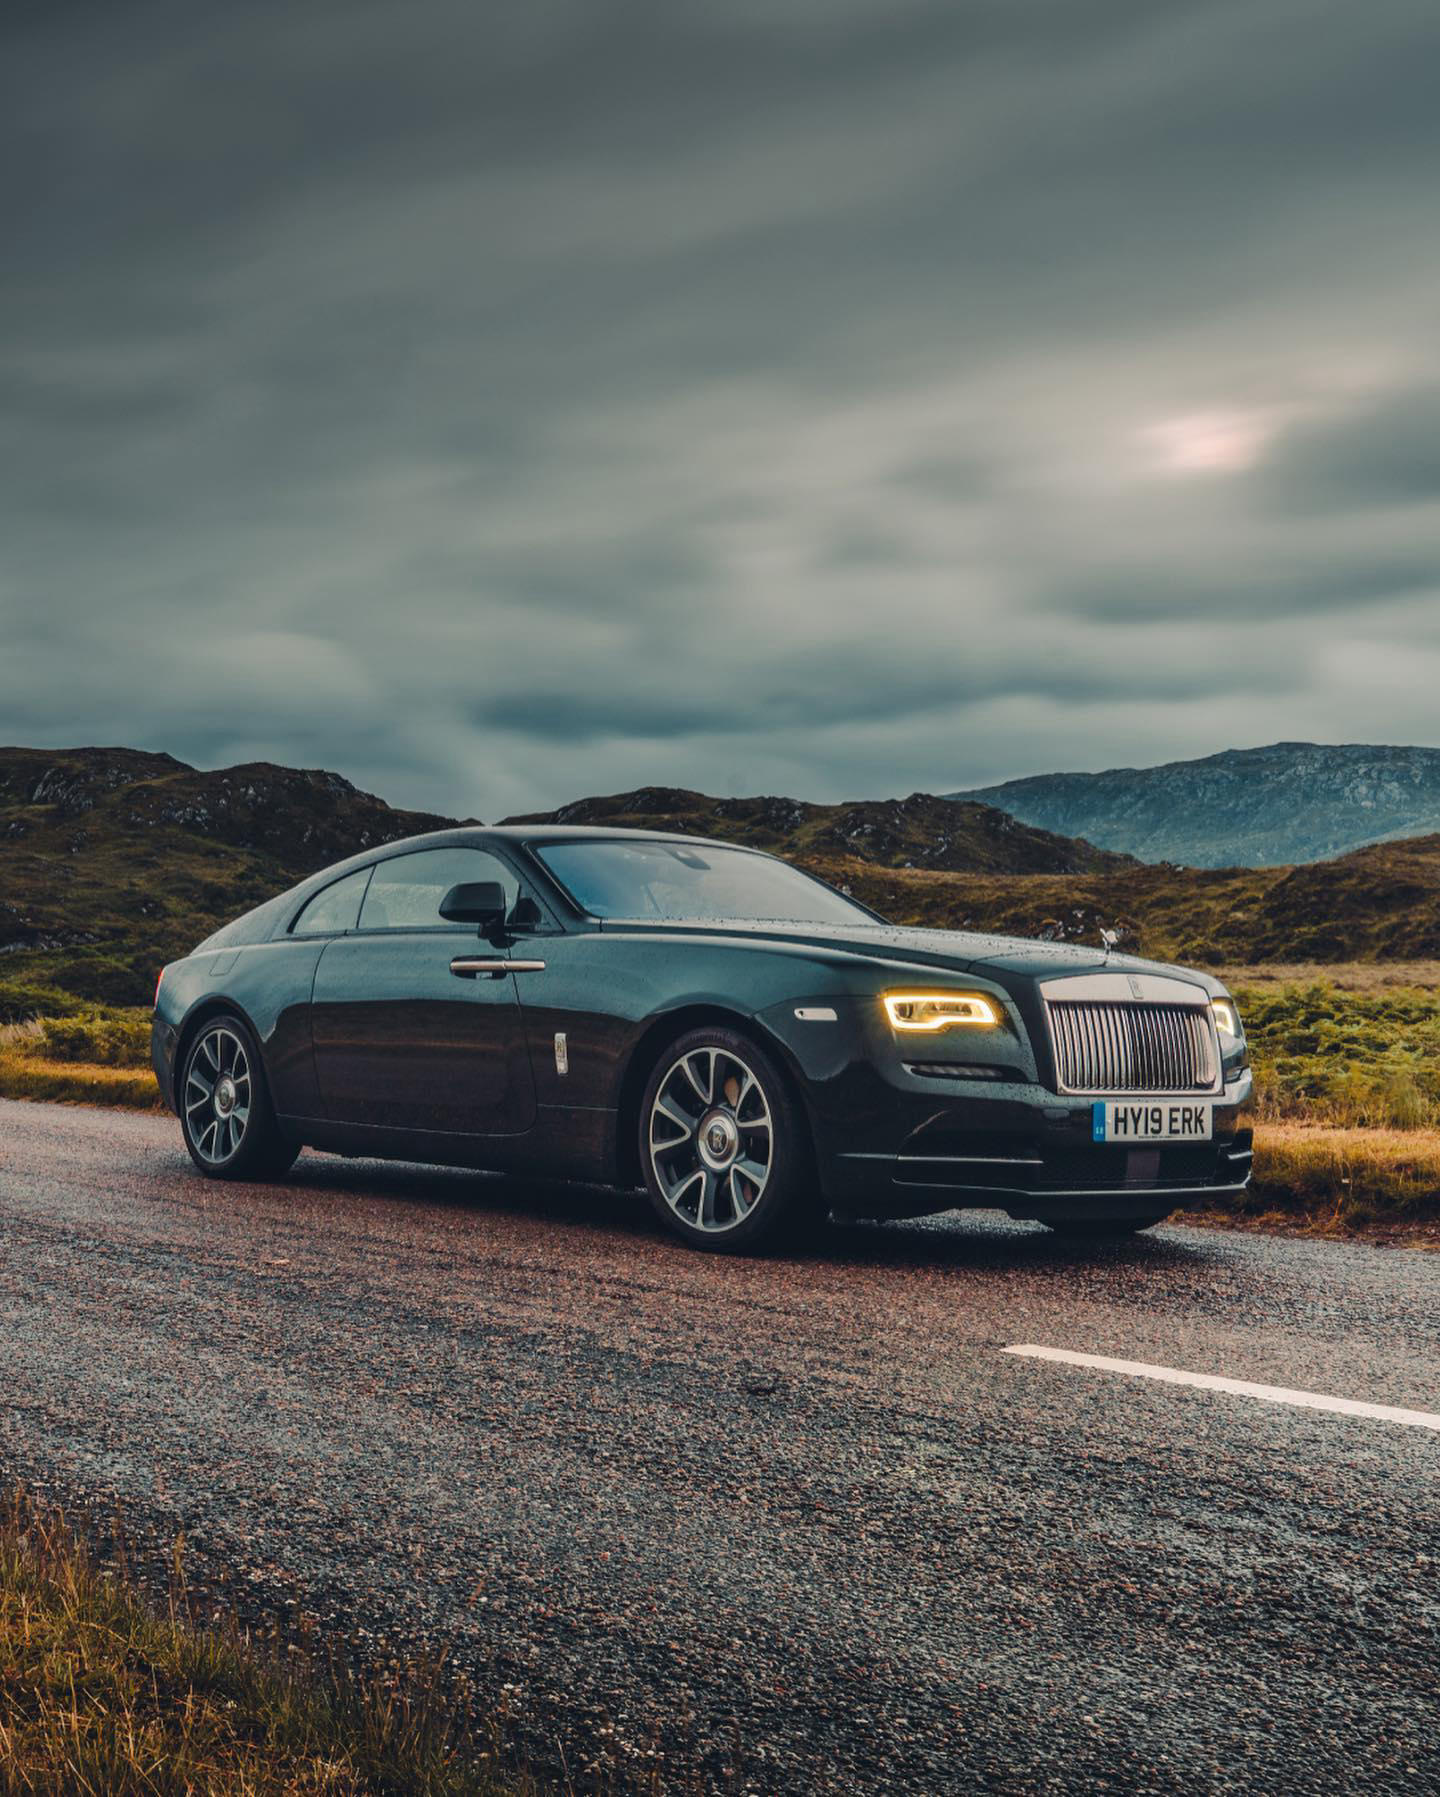 Rolls-Royce Motor Cars - Known for its rolling moorlands, tranquil lochs, and elevated mountain rang